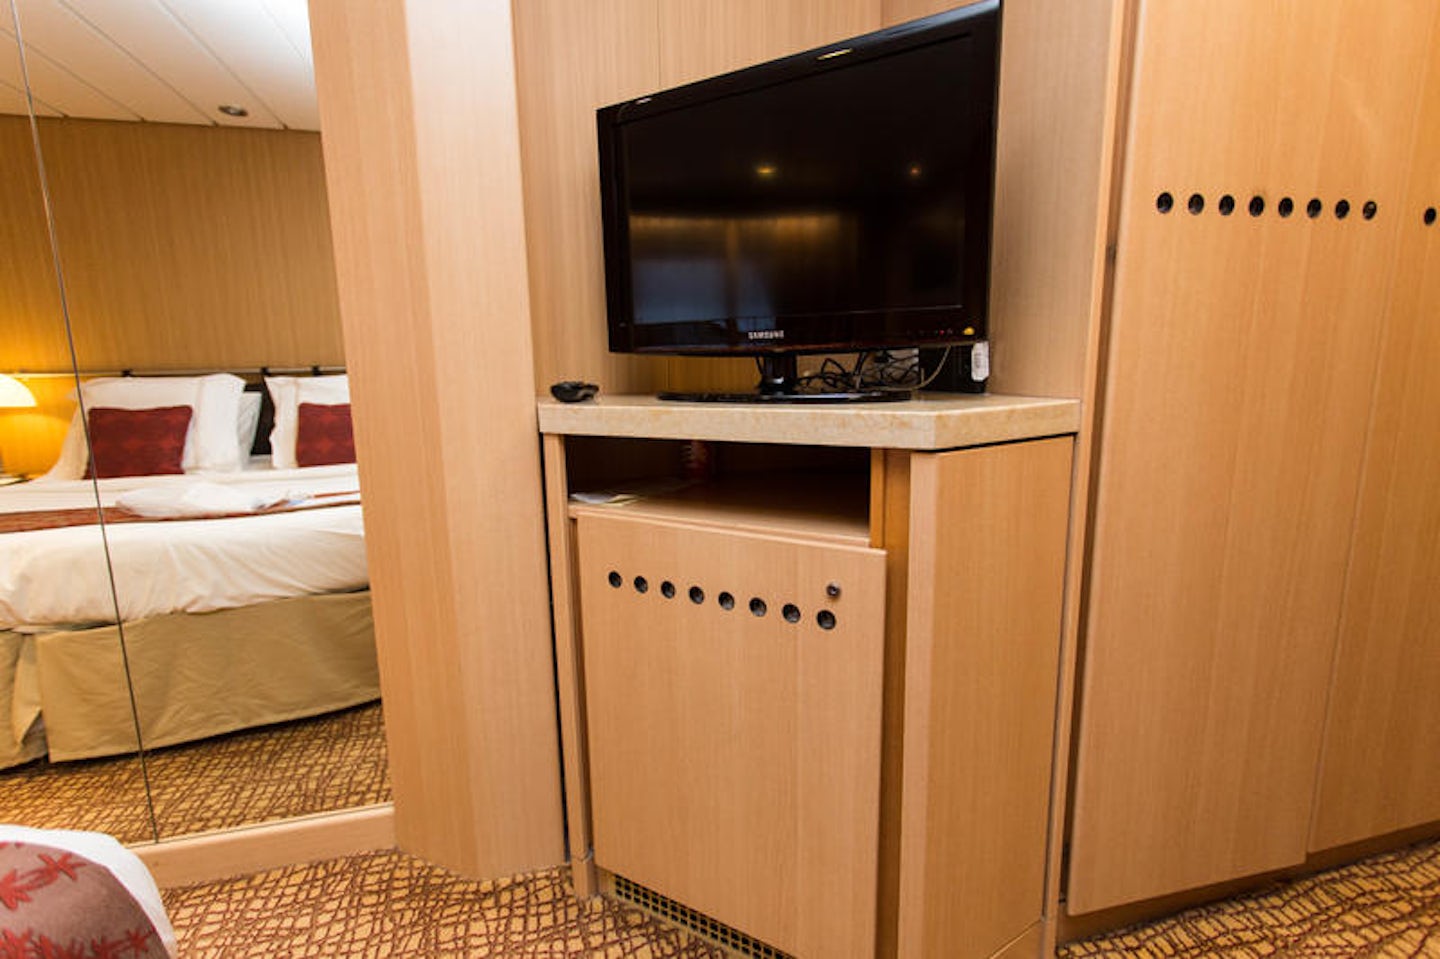 The AquaClass Cabin on Celebrity Infinity